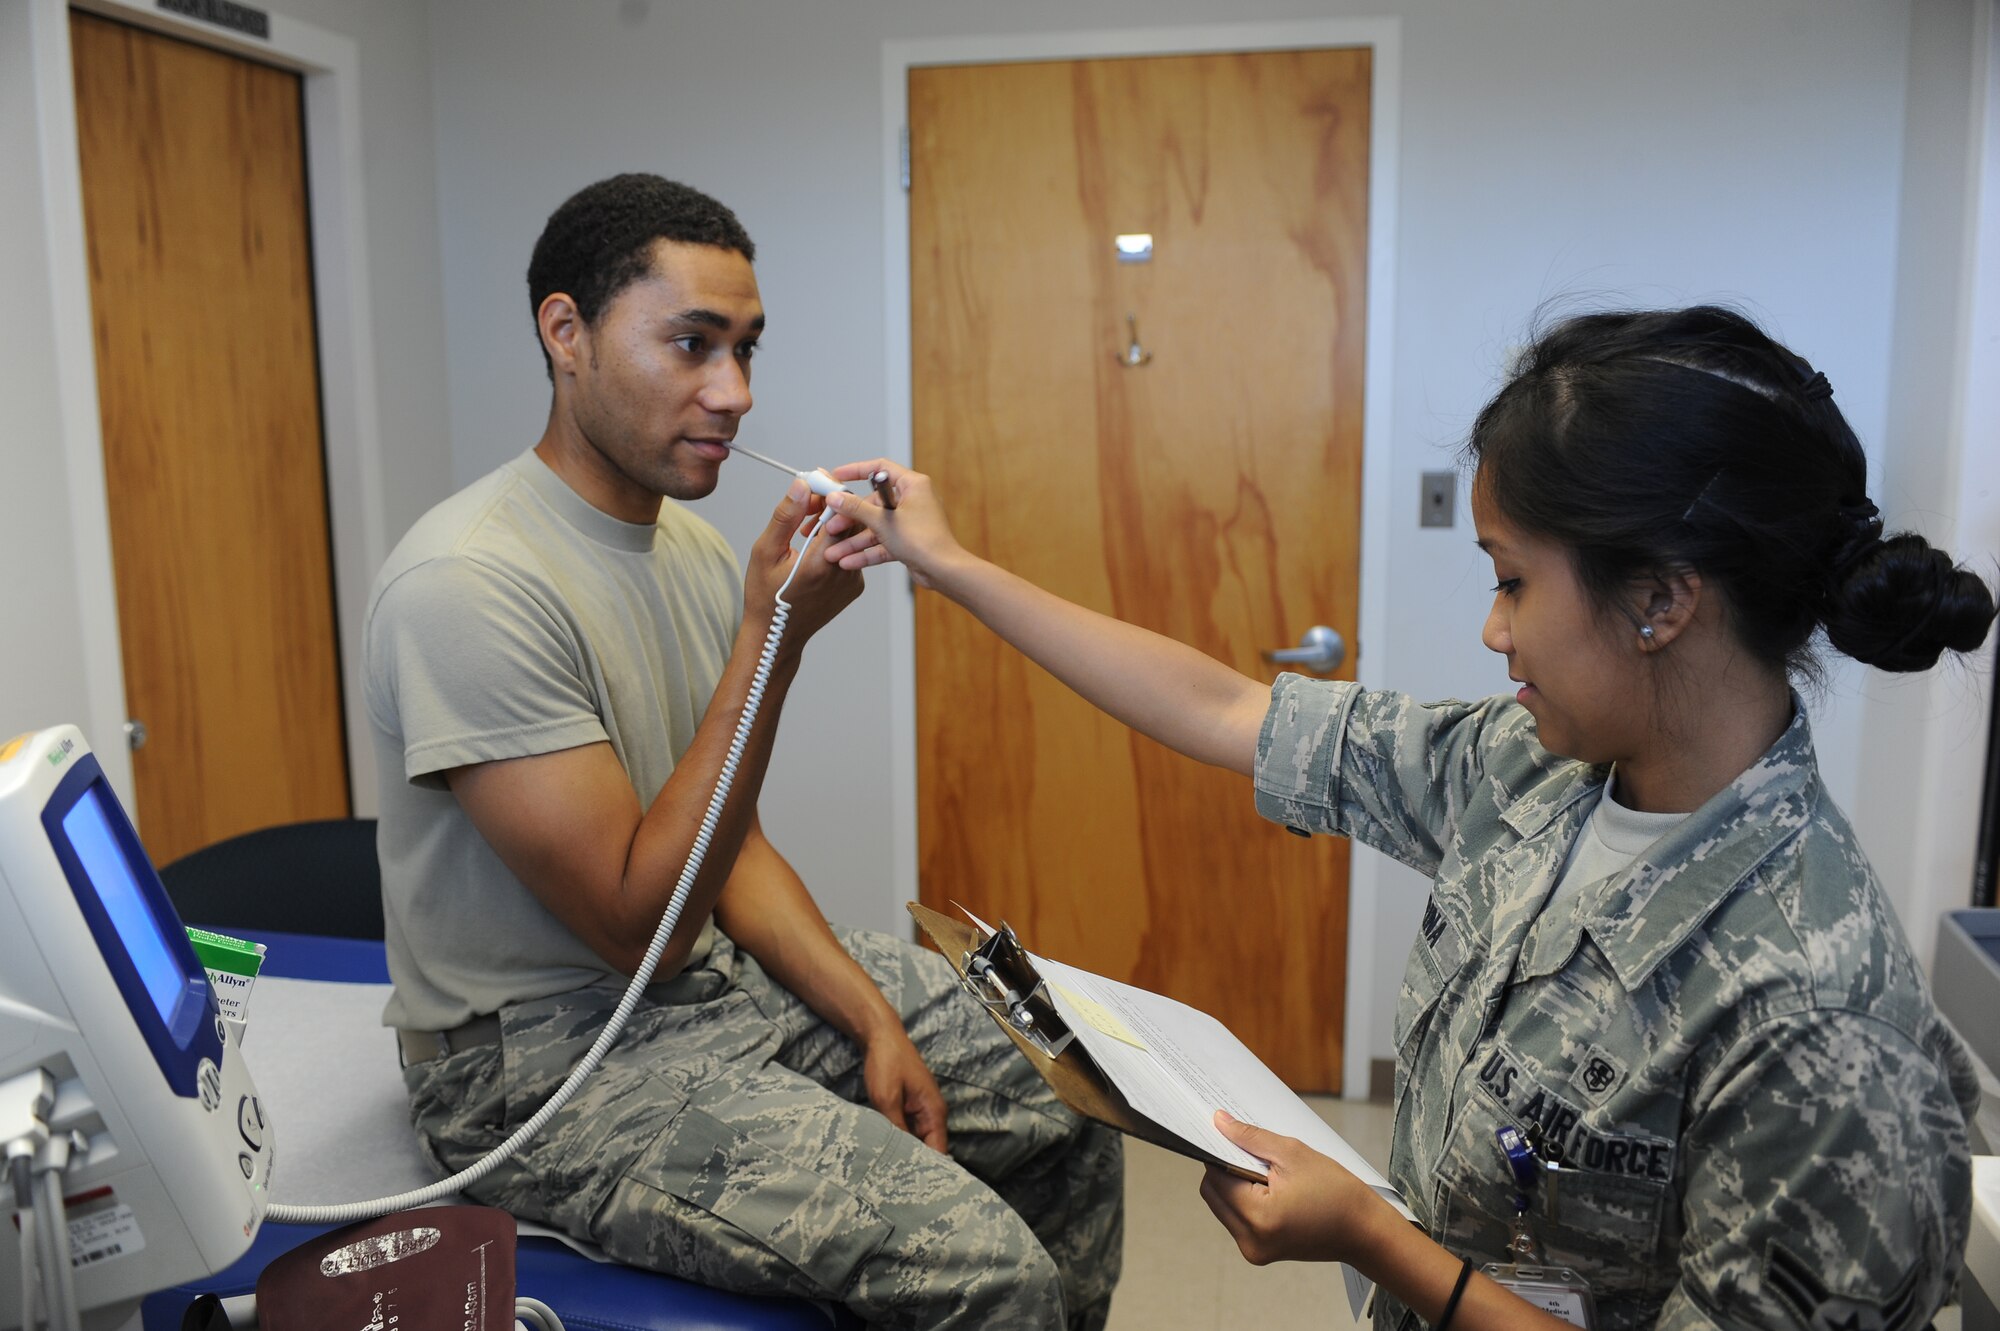 U.S. Air Force Airman 1st Class Janna Harina checks Senior Airman Reginald Graves’ temperature with a thermometer probe at the 4th Medical Group on Seymour Johnson Air Force Base, N.C., May 8, 2012. Along with taking patients’ temperatures Harina also checks their weight and records their blood pressure. Harina, 4th Medical Operations Squadron medical technician, is from San Diego. Graves, 4th Component Maintenance Squadron test measurement diagnostic equipment technician, is a native of Raleigh, N.C. (U.S. Air Force photo/Airman 1st Class John Nieves Camacho/Released)